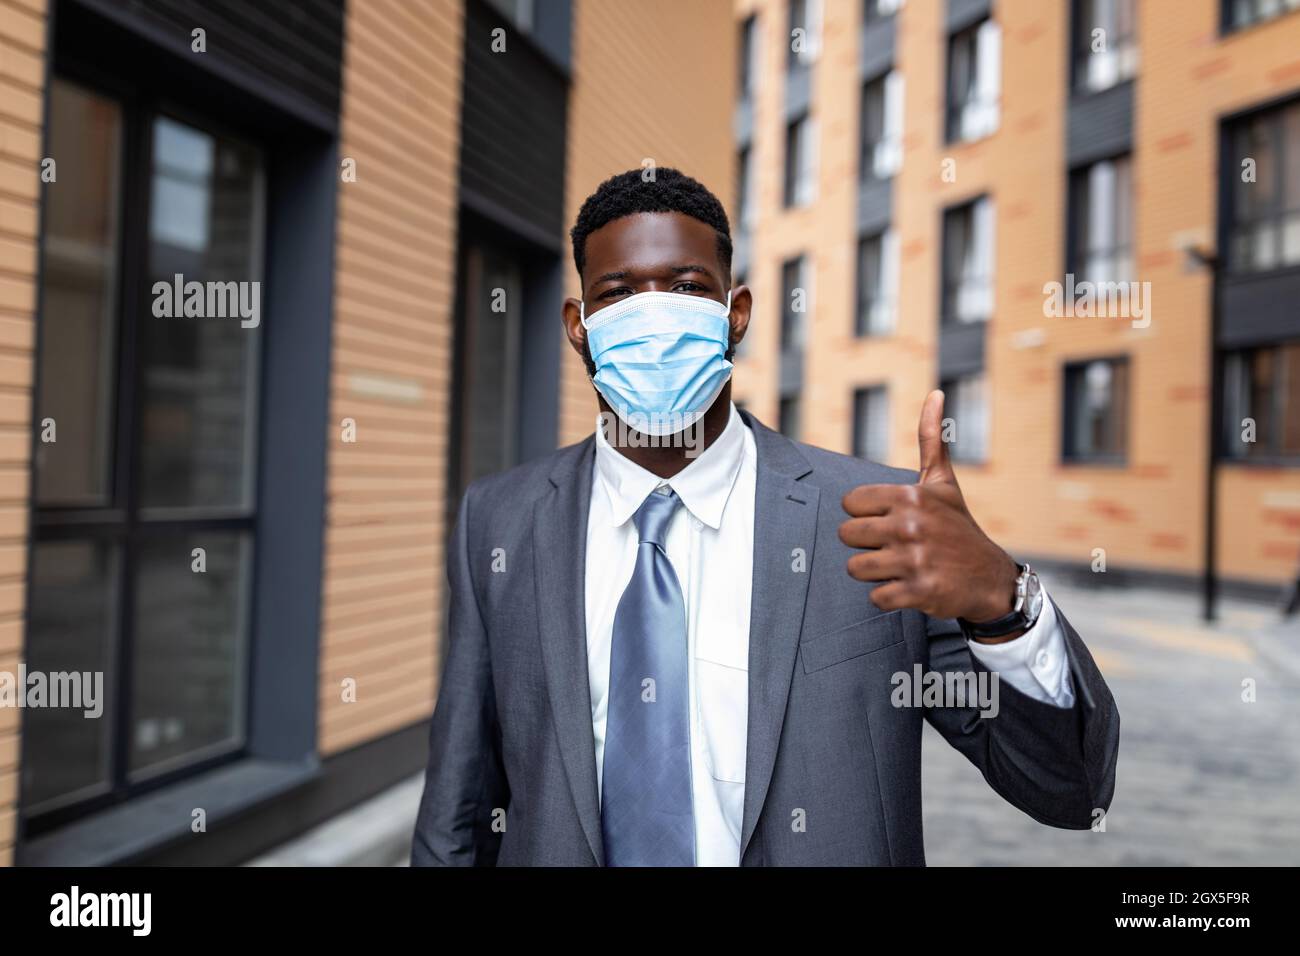 African american businessman in medical face mask and formal outfit, showing thumb up while standing outdoors Stock Photo